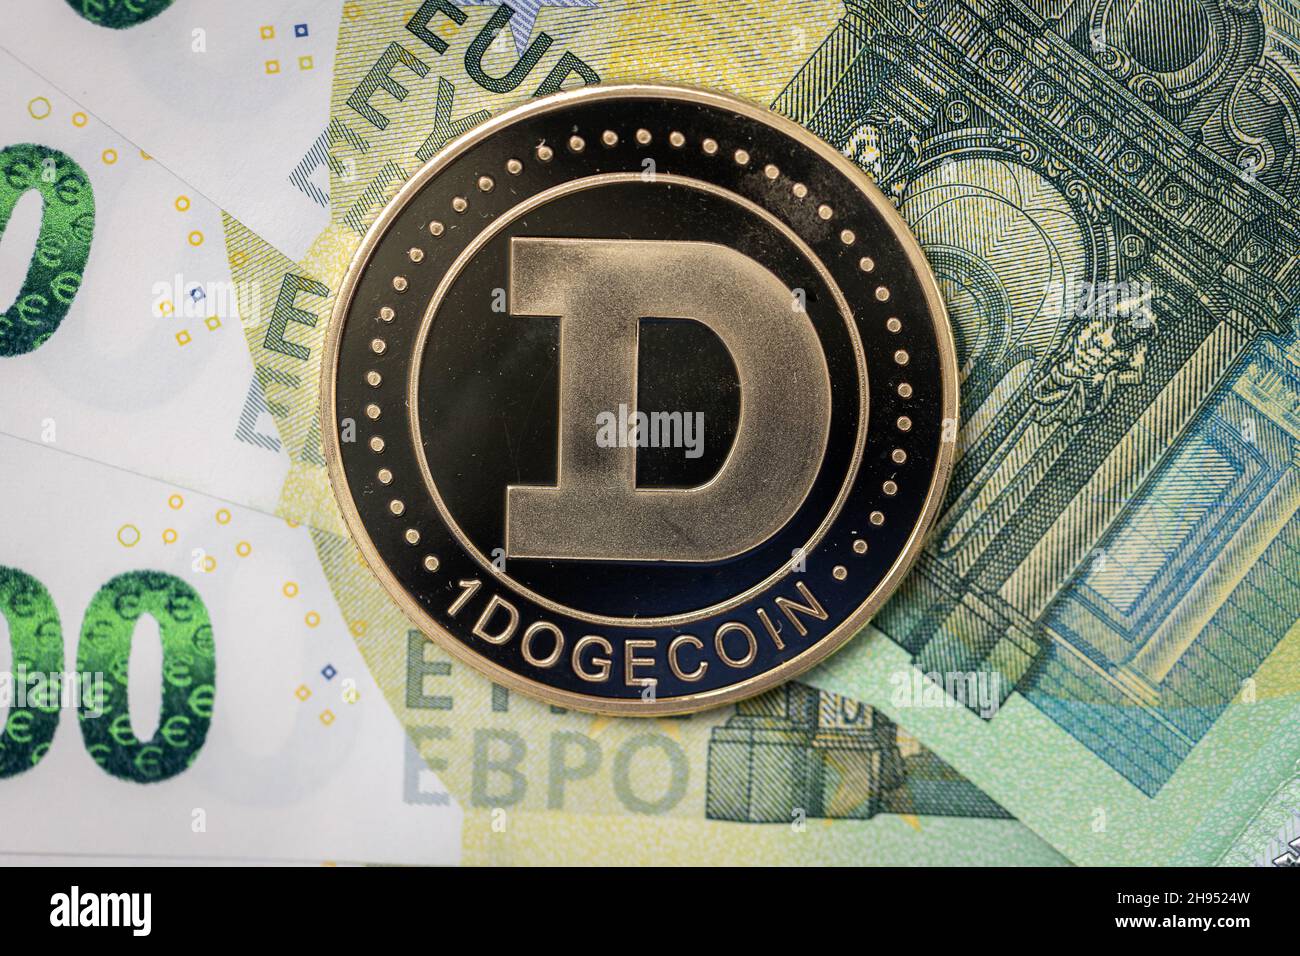 Dogecoin physical coin laying on top of 100 Euro bills. Stock Photo